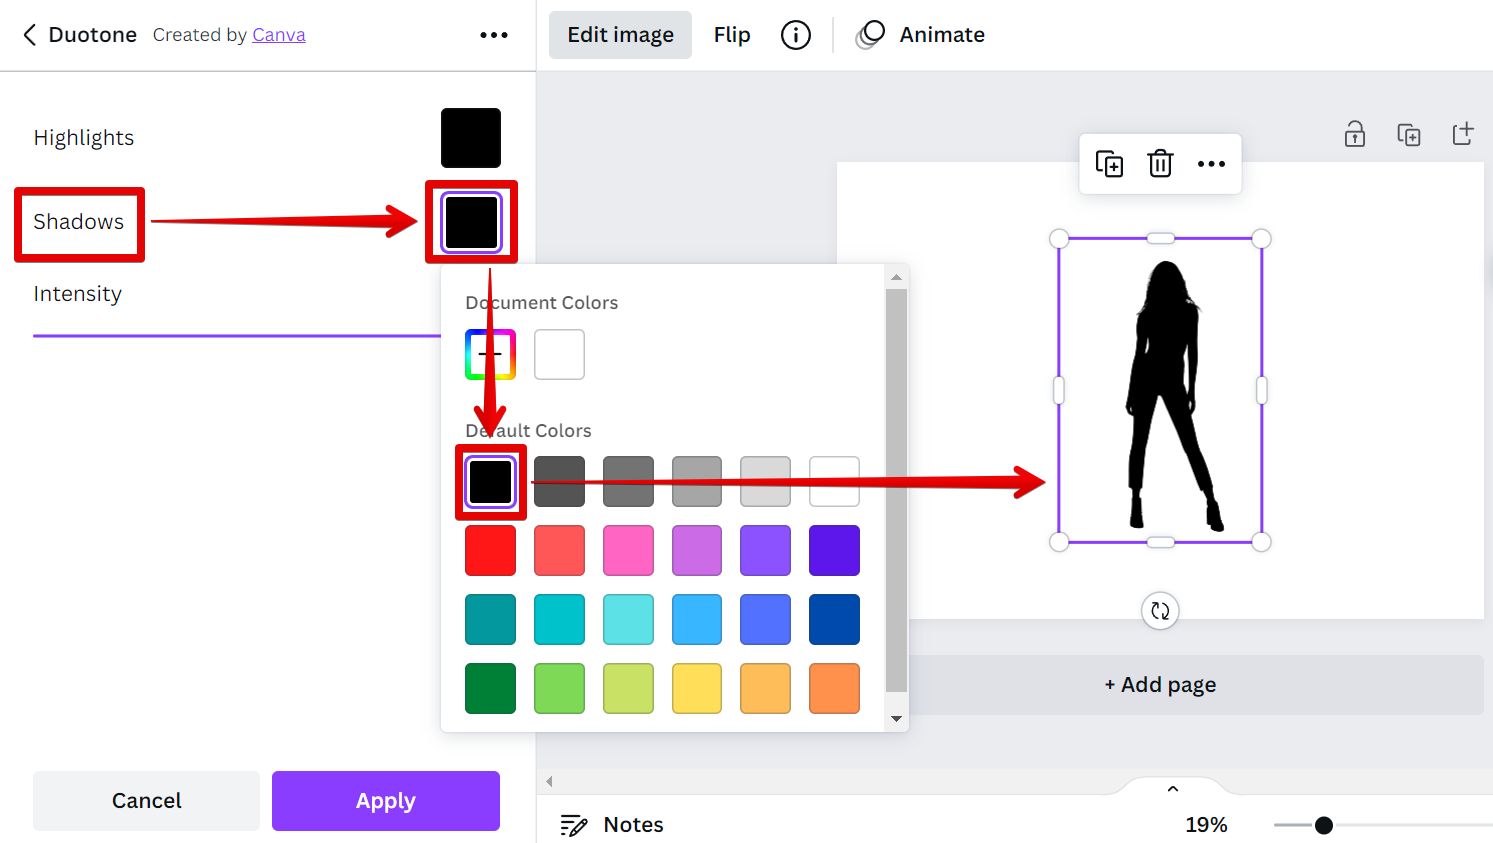 How to Make a Silhouette in Canva - Canva Templates